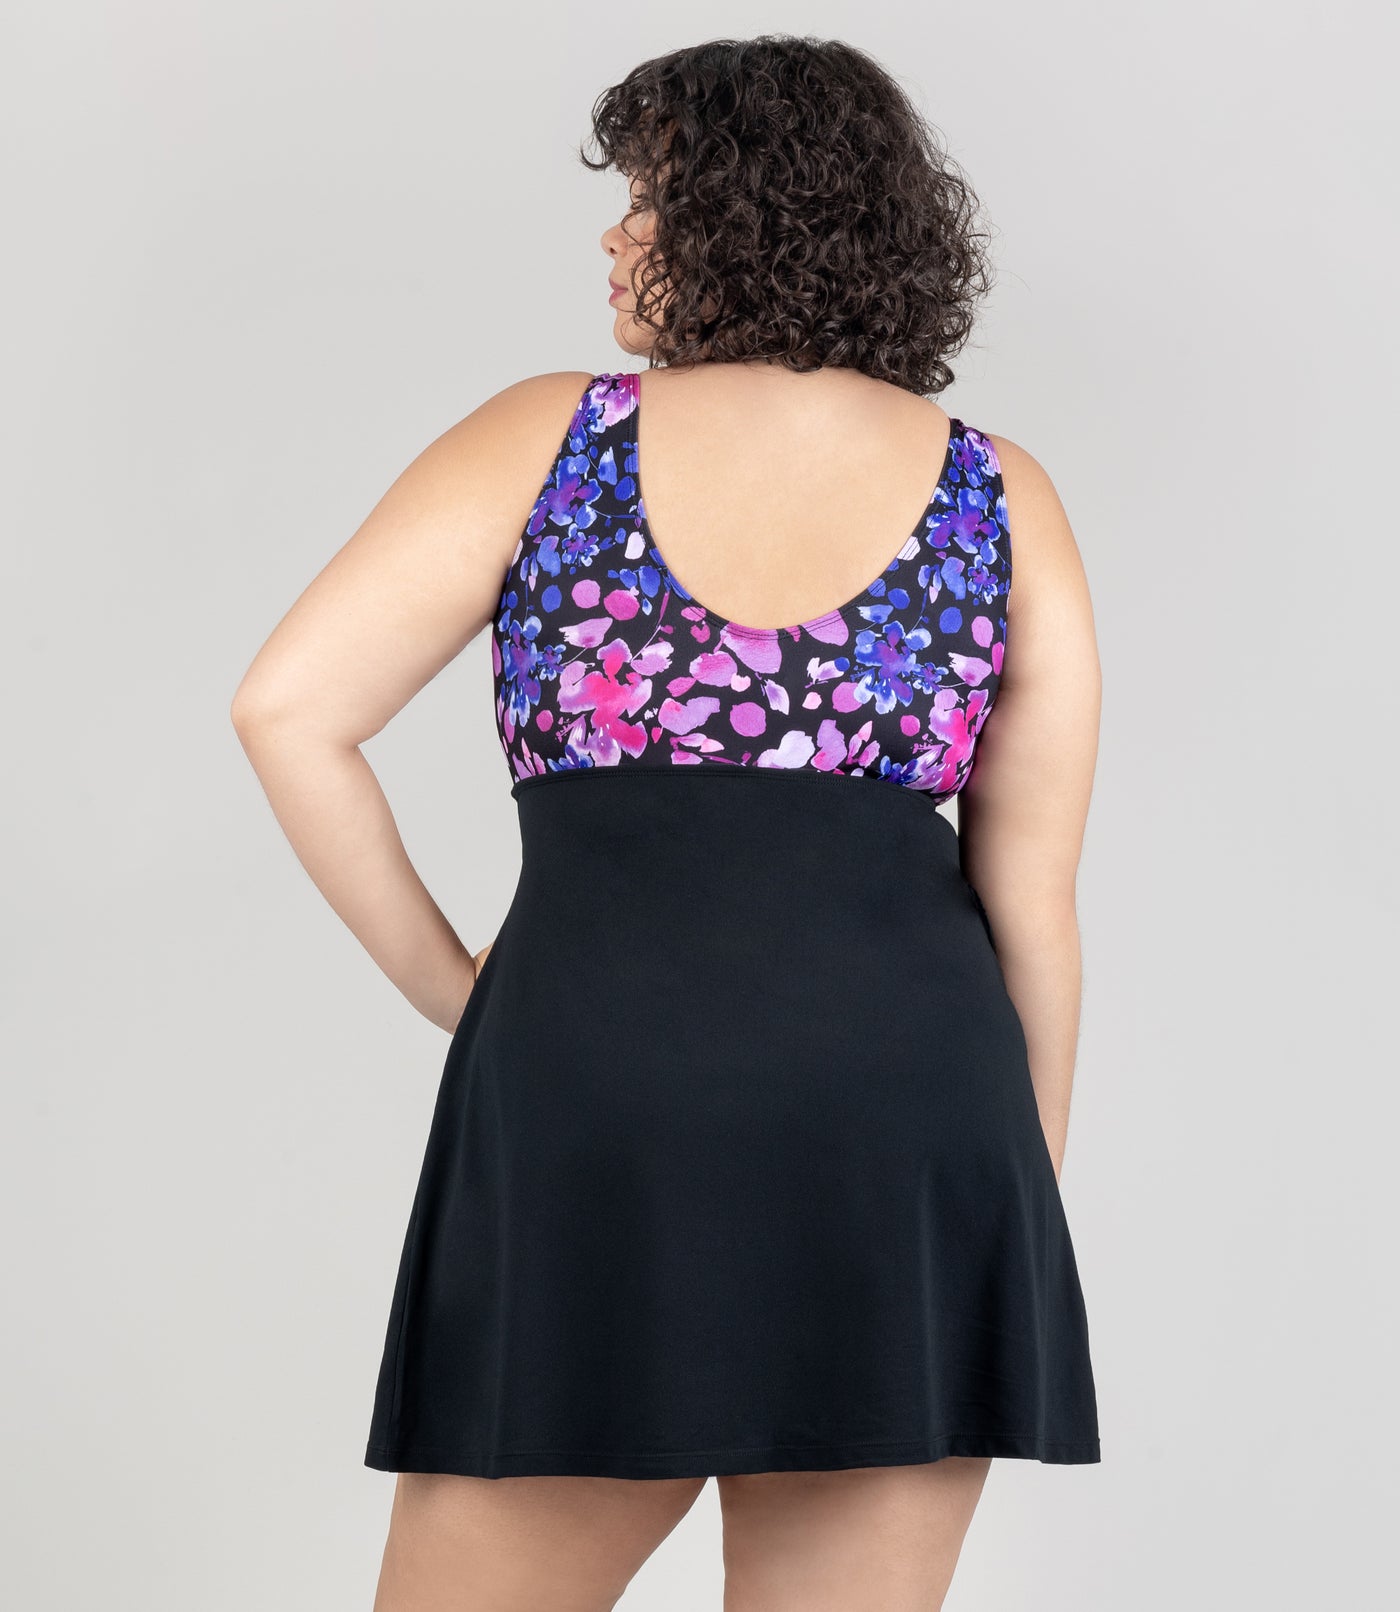 JunoActive model wearing Aquasport Shirred Swim Dress. Top of dress is pink and blue floral elegance print and under bust is black fabric. Model facing back.